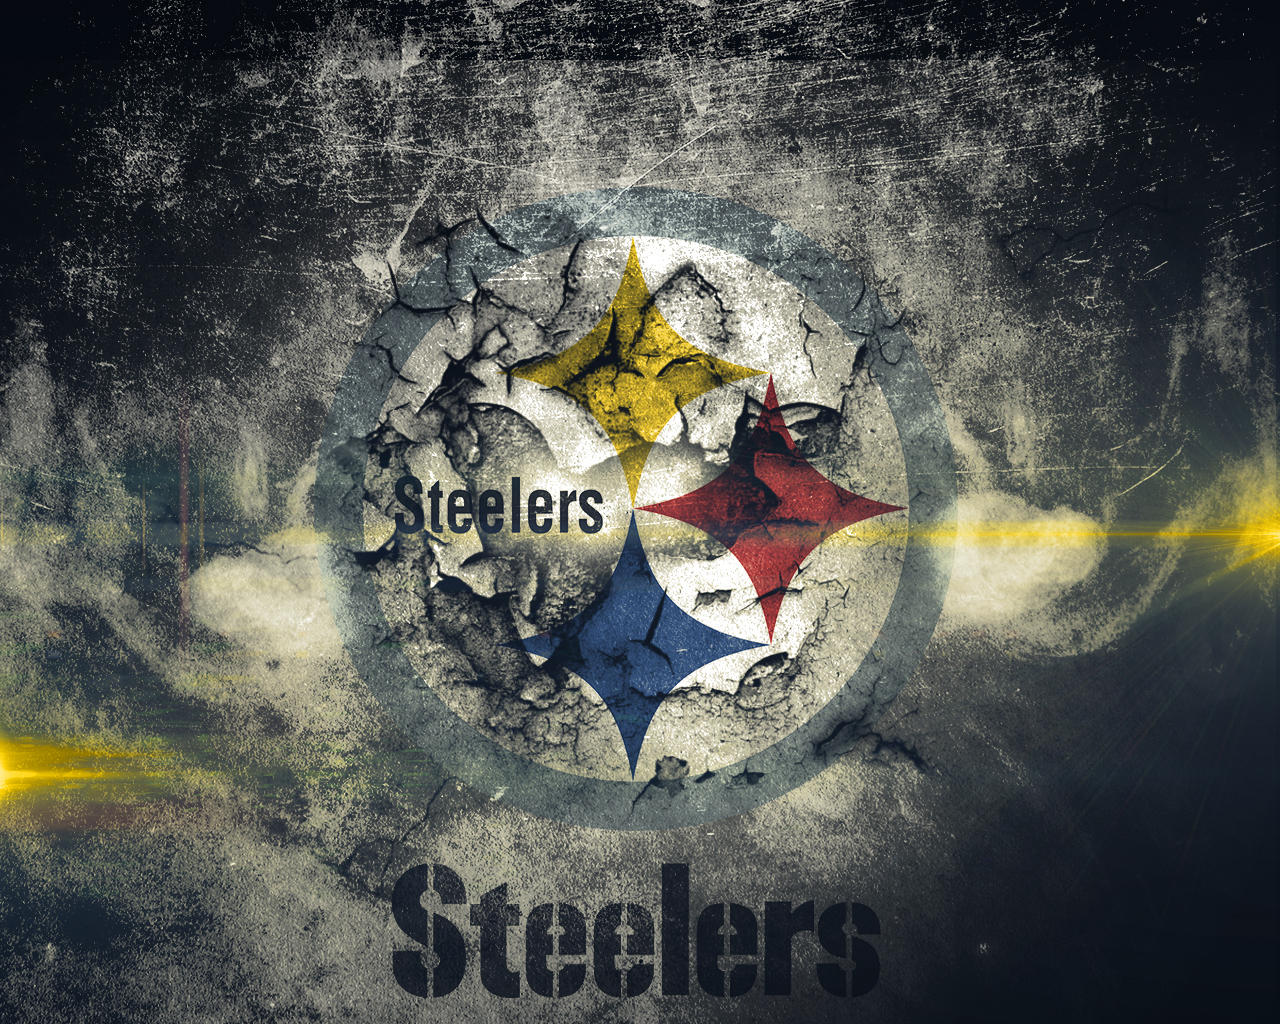 And here, even more information about Pittsburgh Steelers!